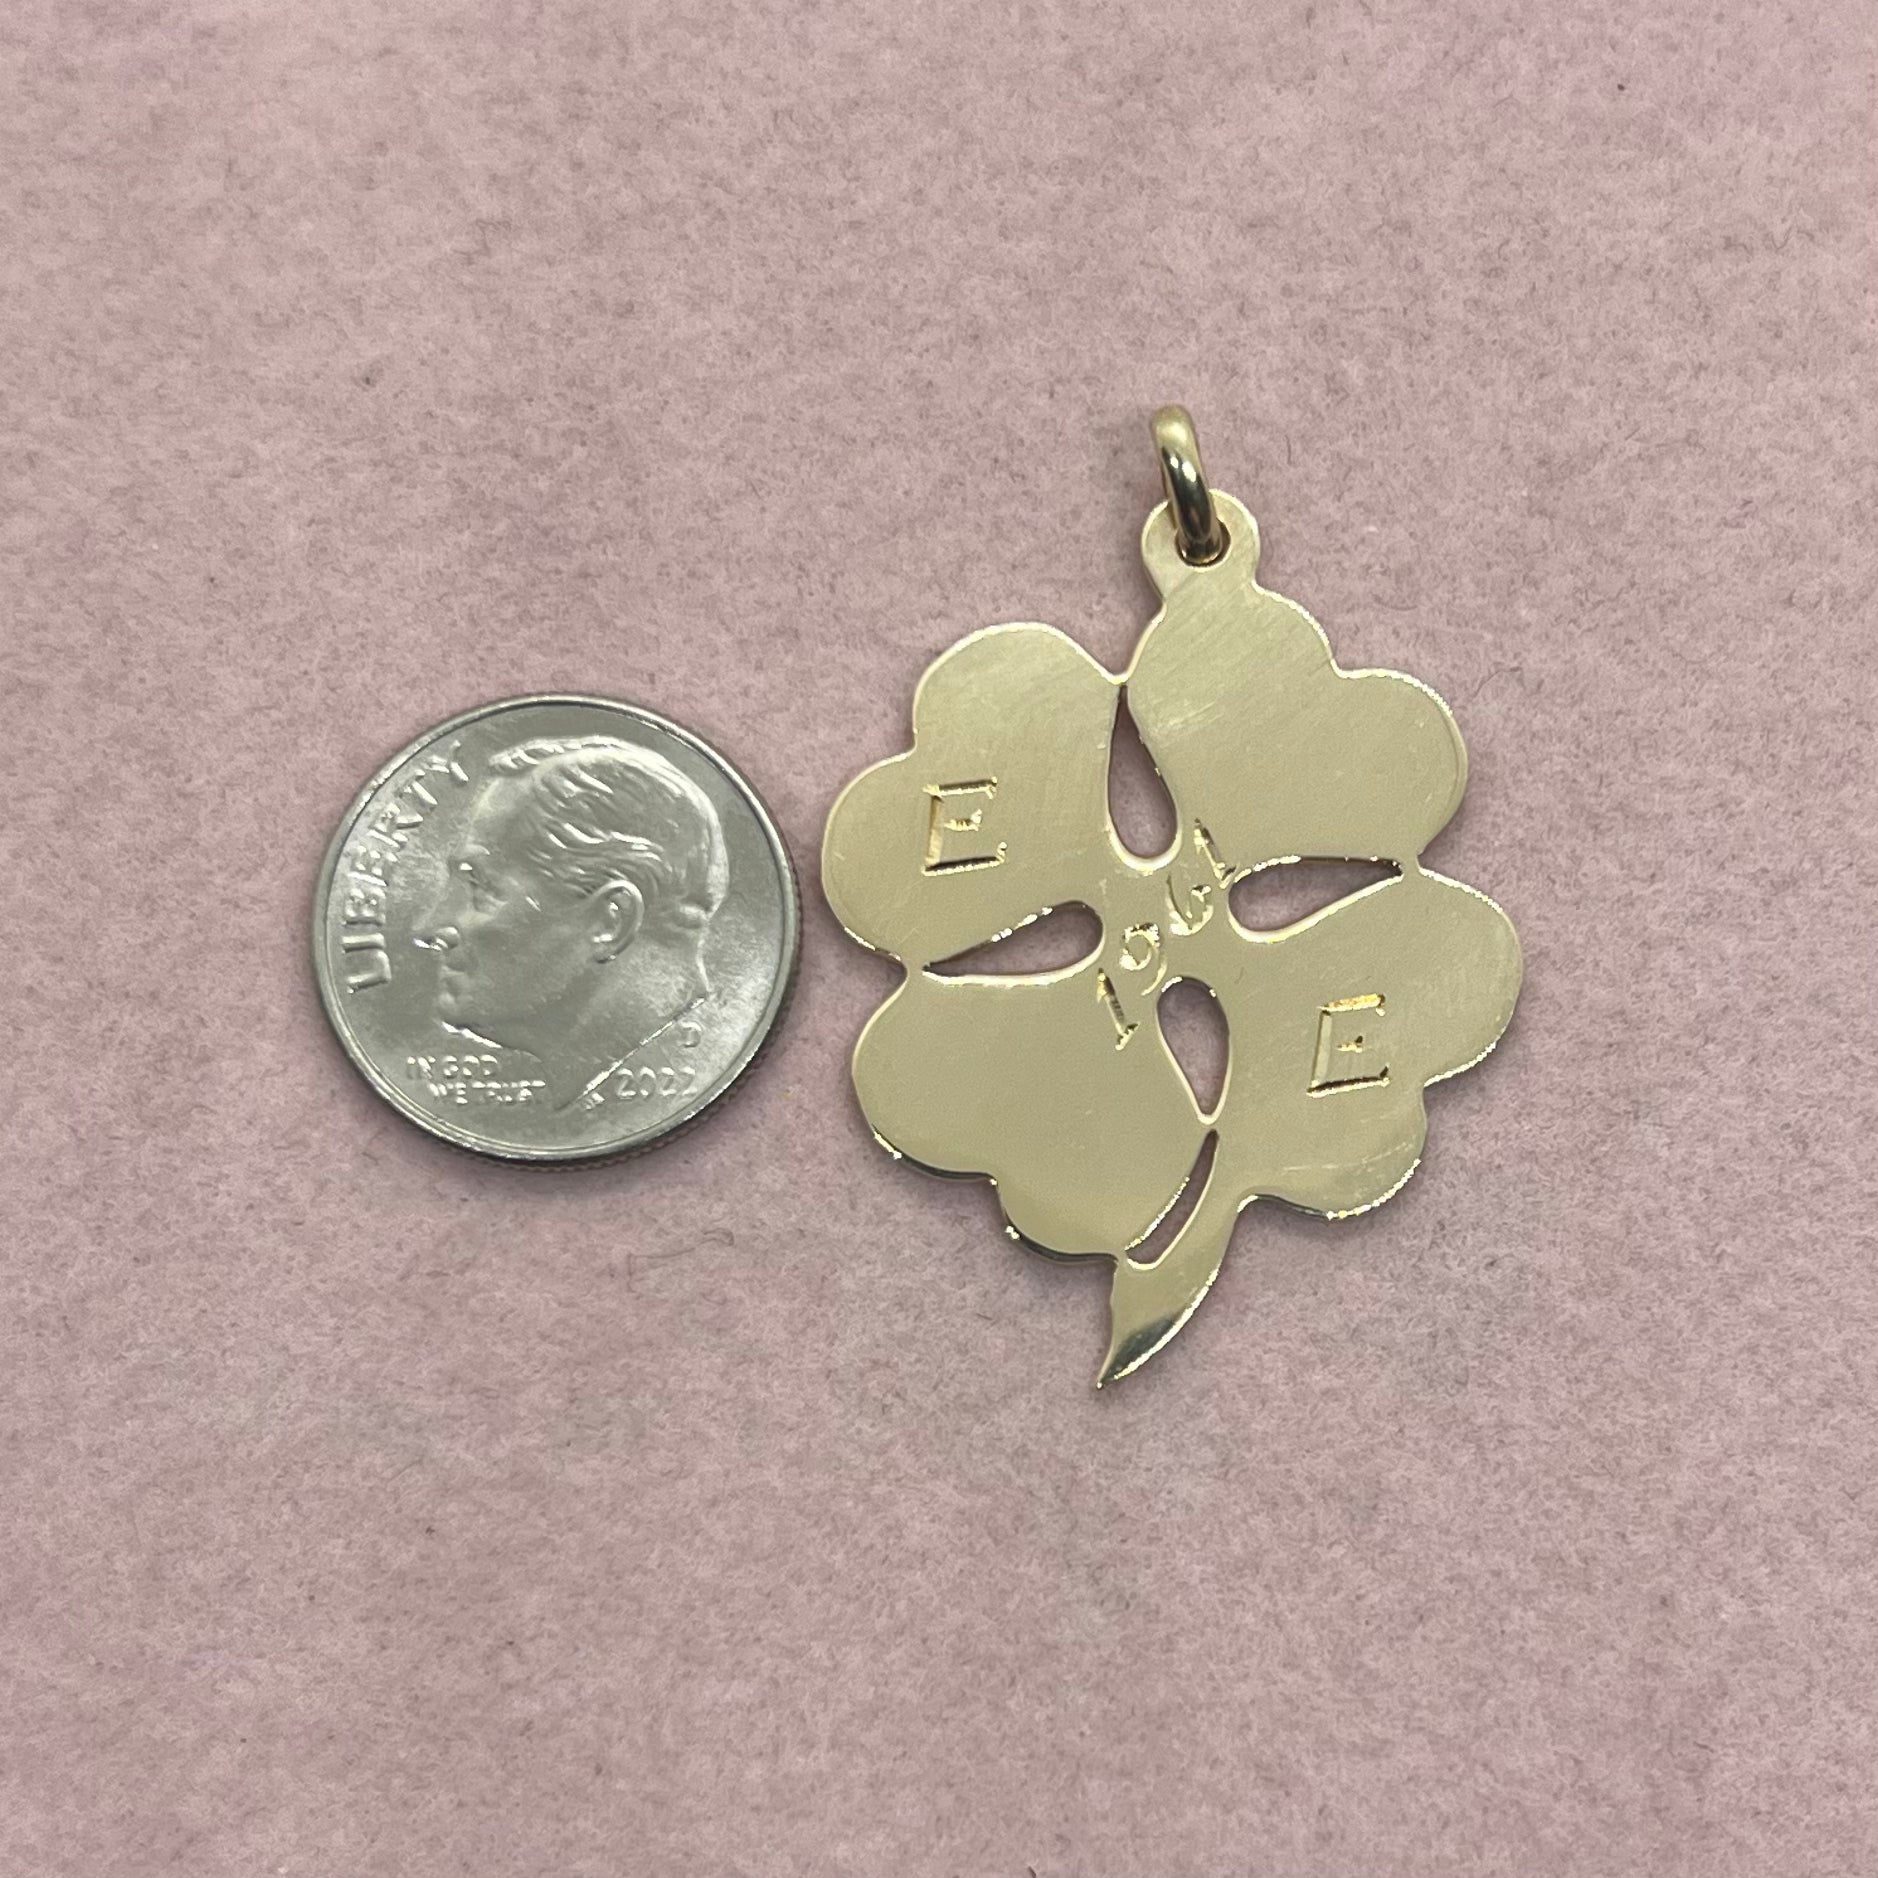 Four Leaf Clover Pendant with 1961 Engraving